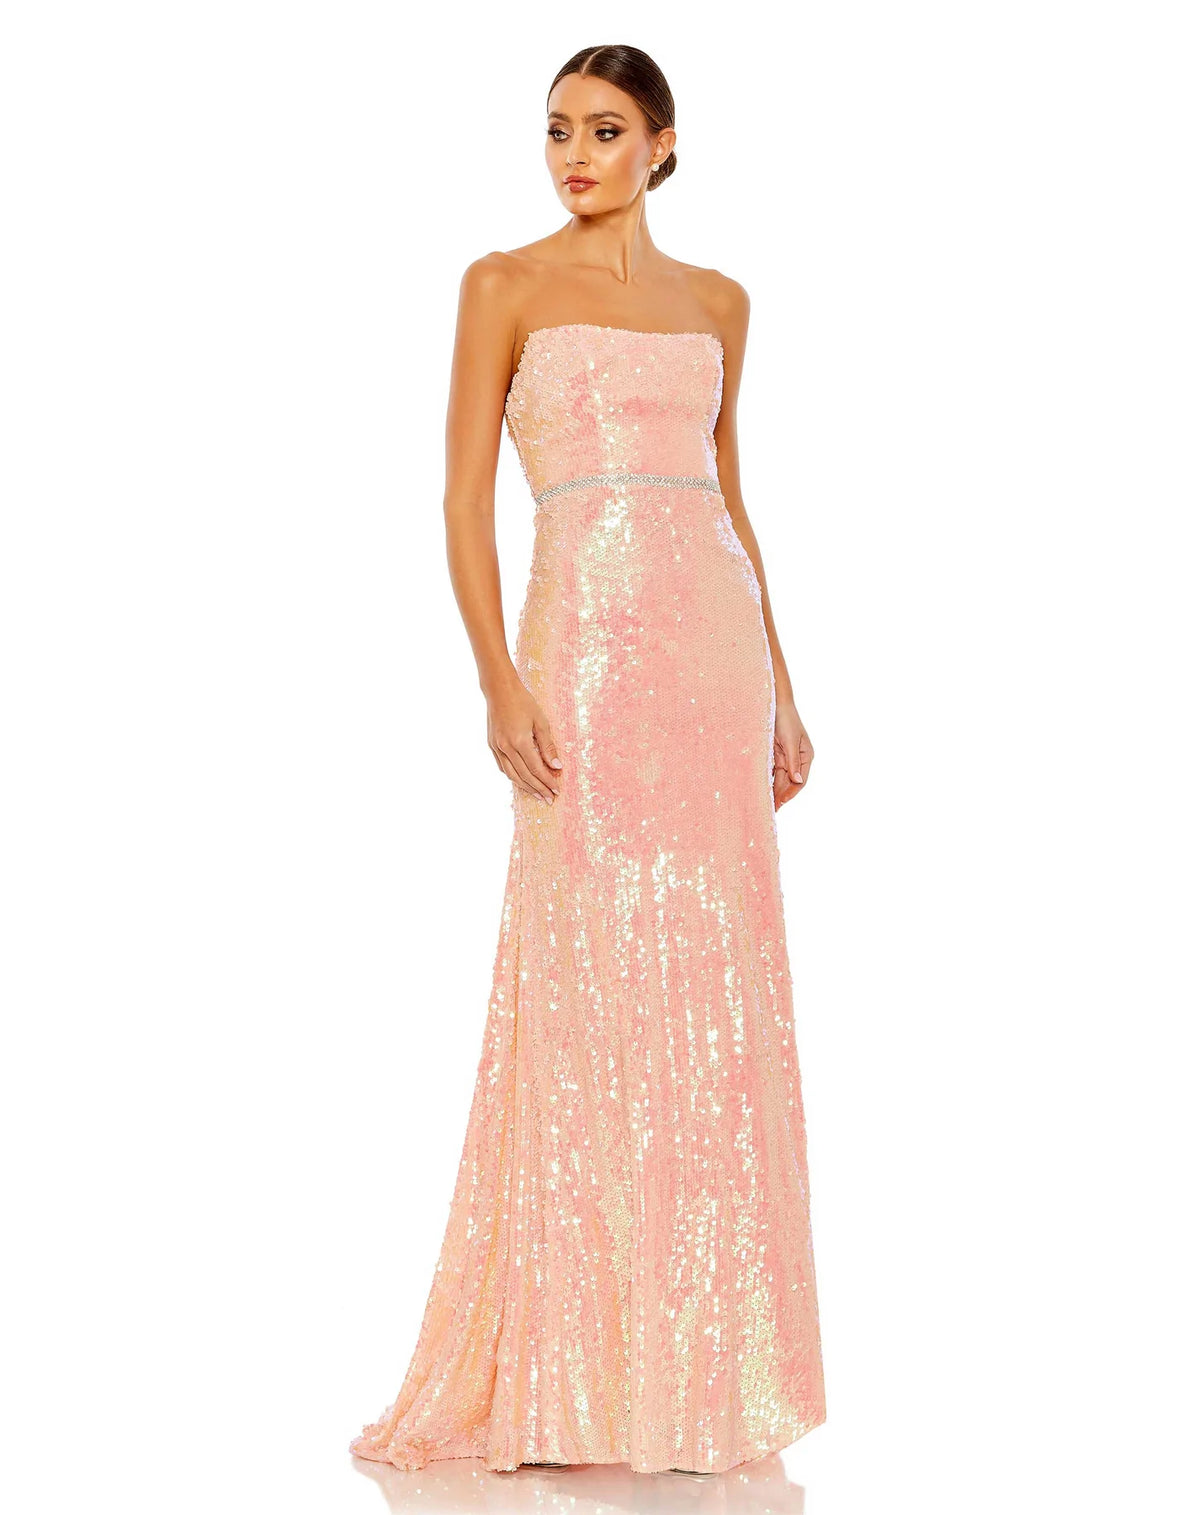 This elegant strapless, coral pink toned, floor length, fitted, formal dress is picture perfect. With an elongating column style and sequinned fabric with a gorgeous crystal belt to cinch in the waist, is finished with a glamorous sweeping train. This gown is perfect for wedding guests, special occasions and proms! 